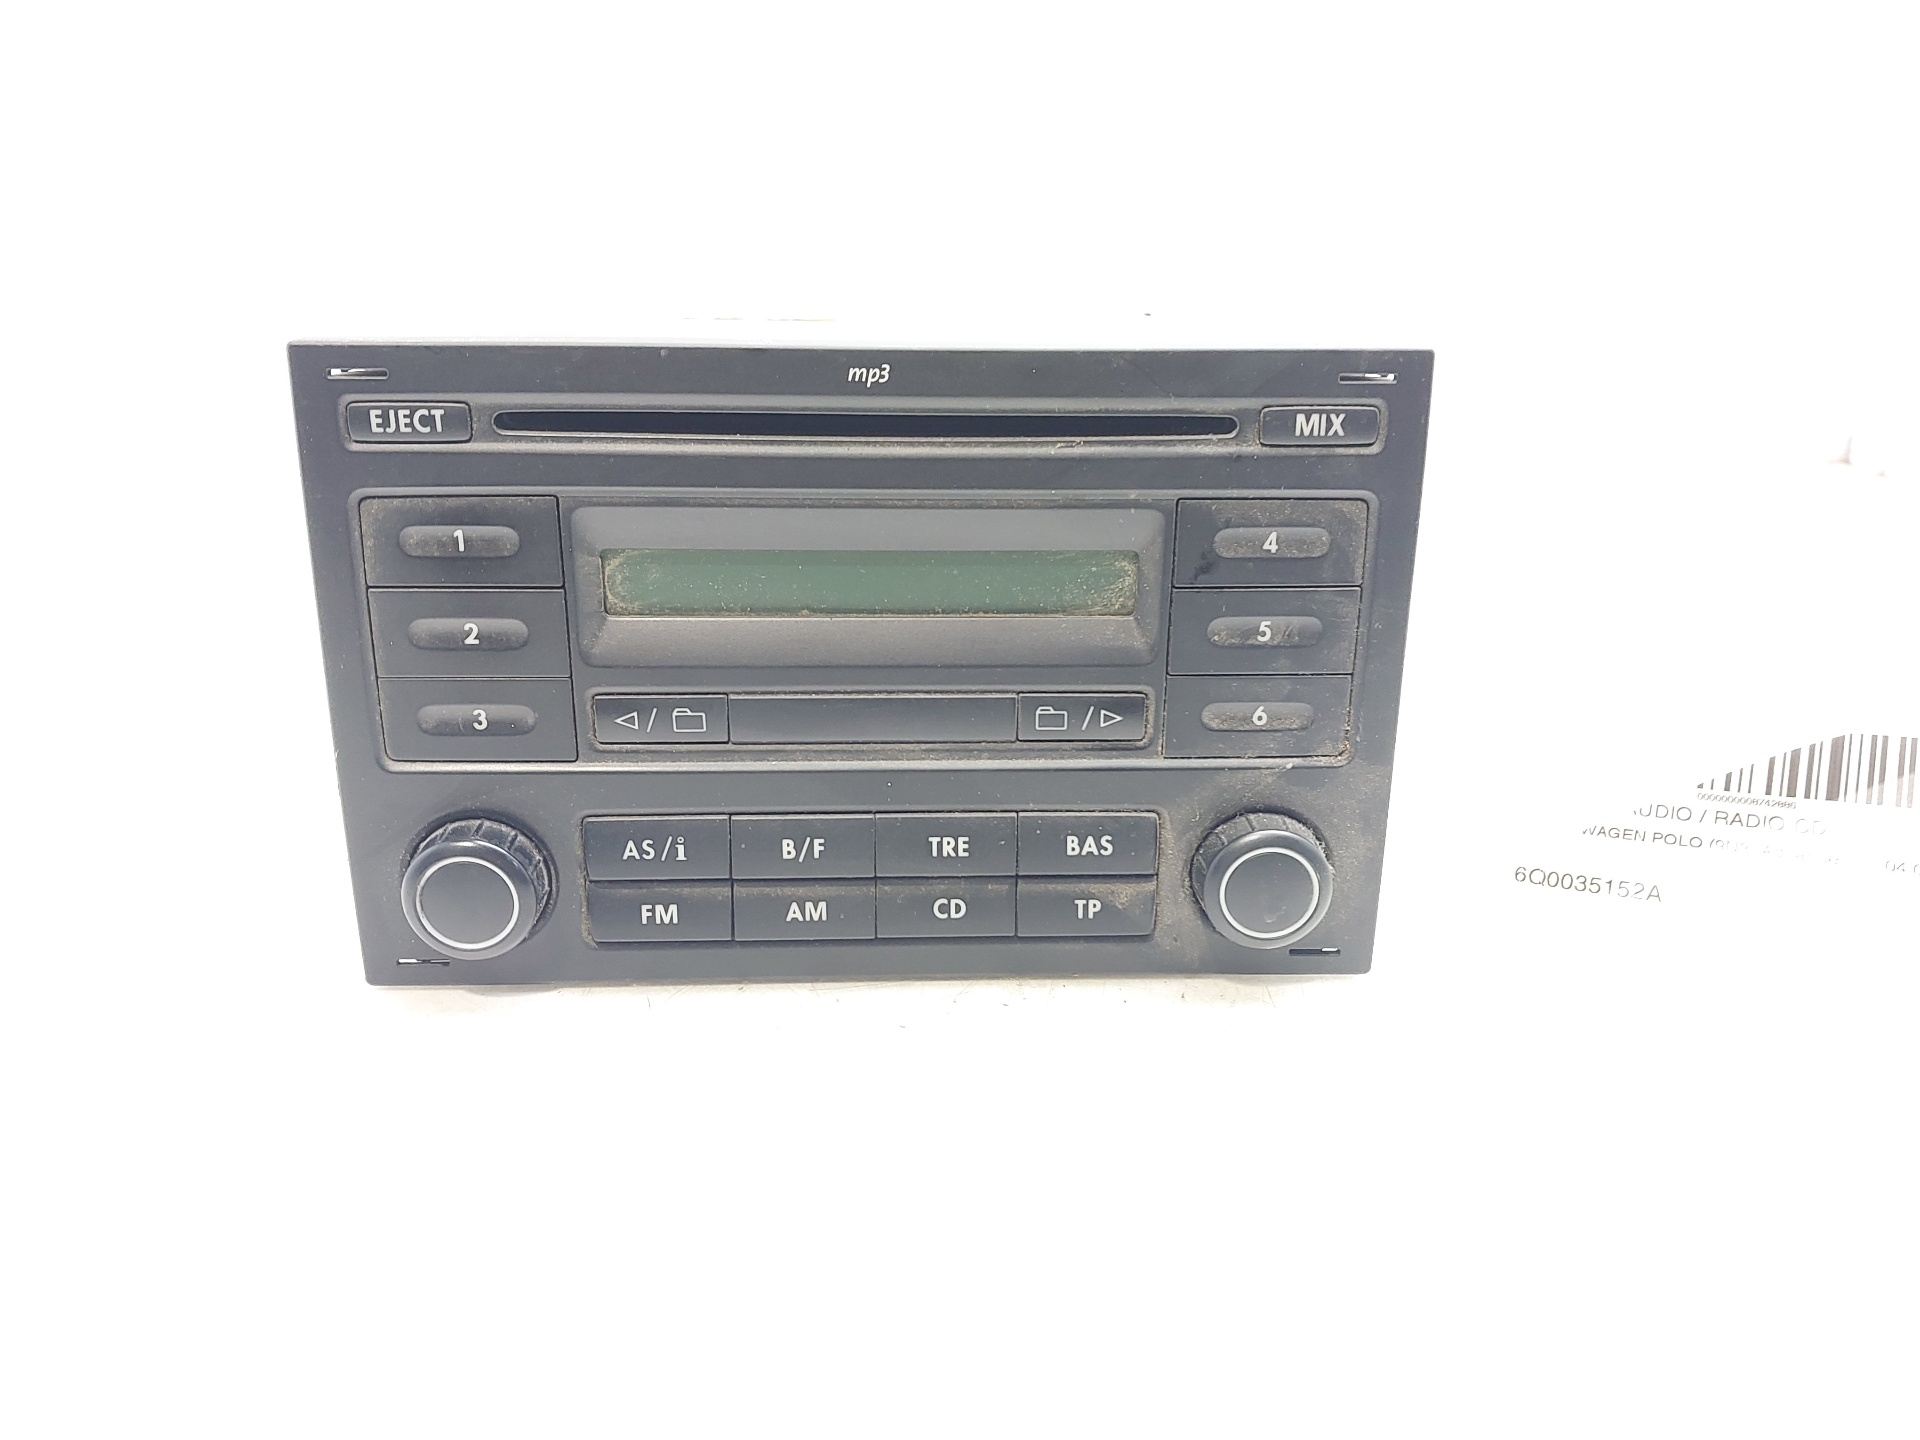 VOLKSWAGEN Polo 4 generation (2001-2009) Music Player Without GPS 6Q0035152A 24973330